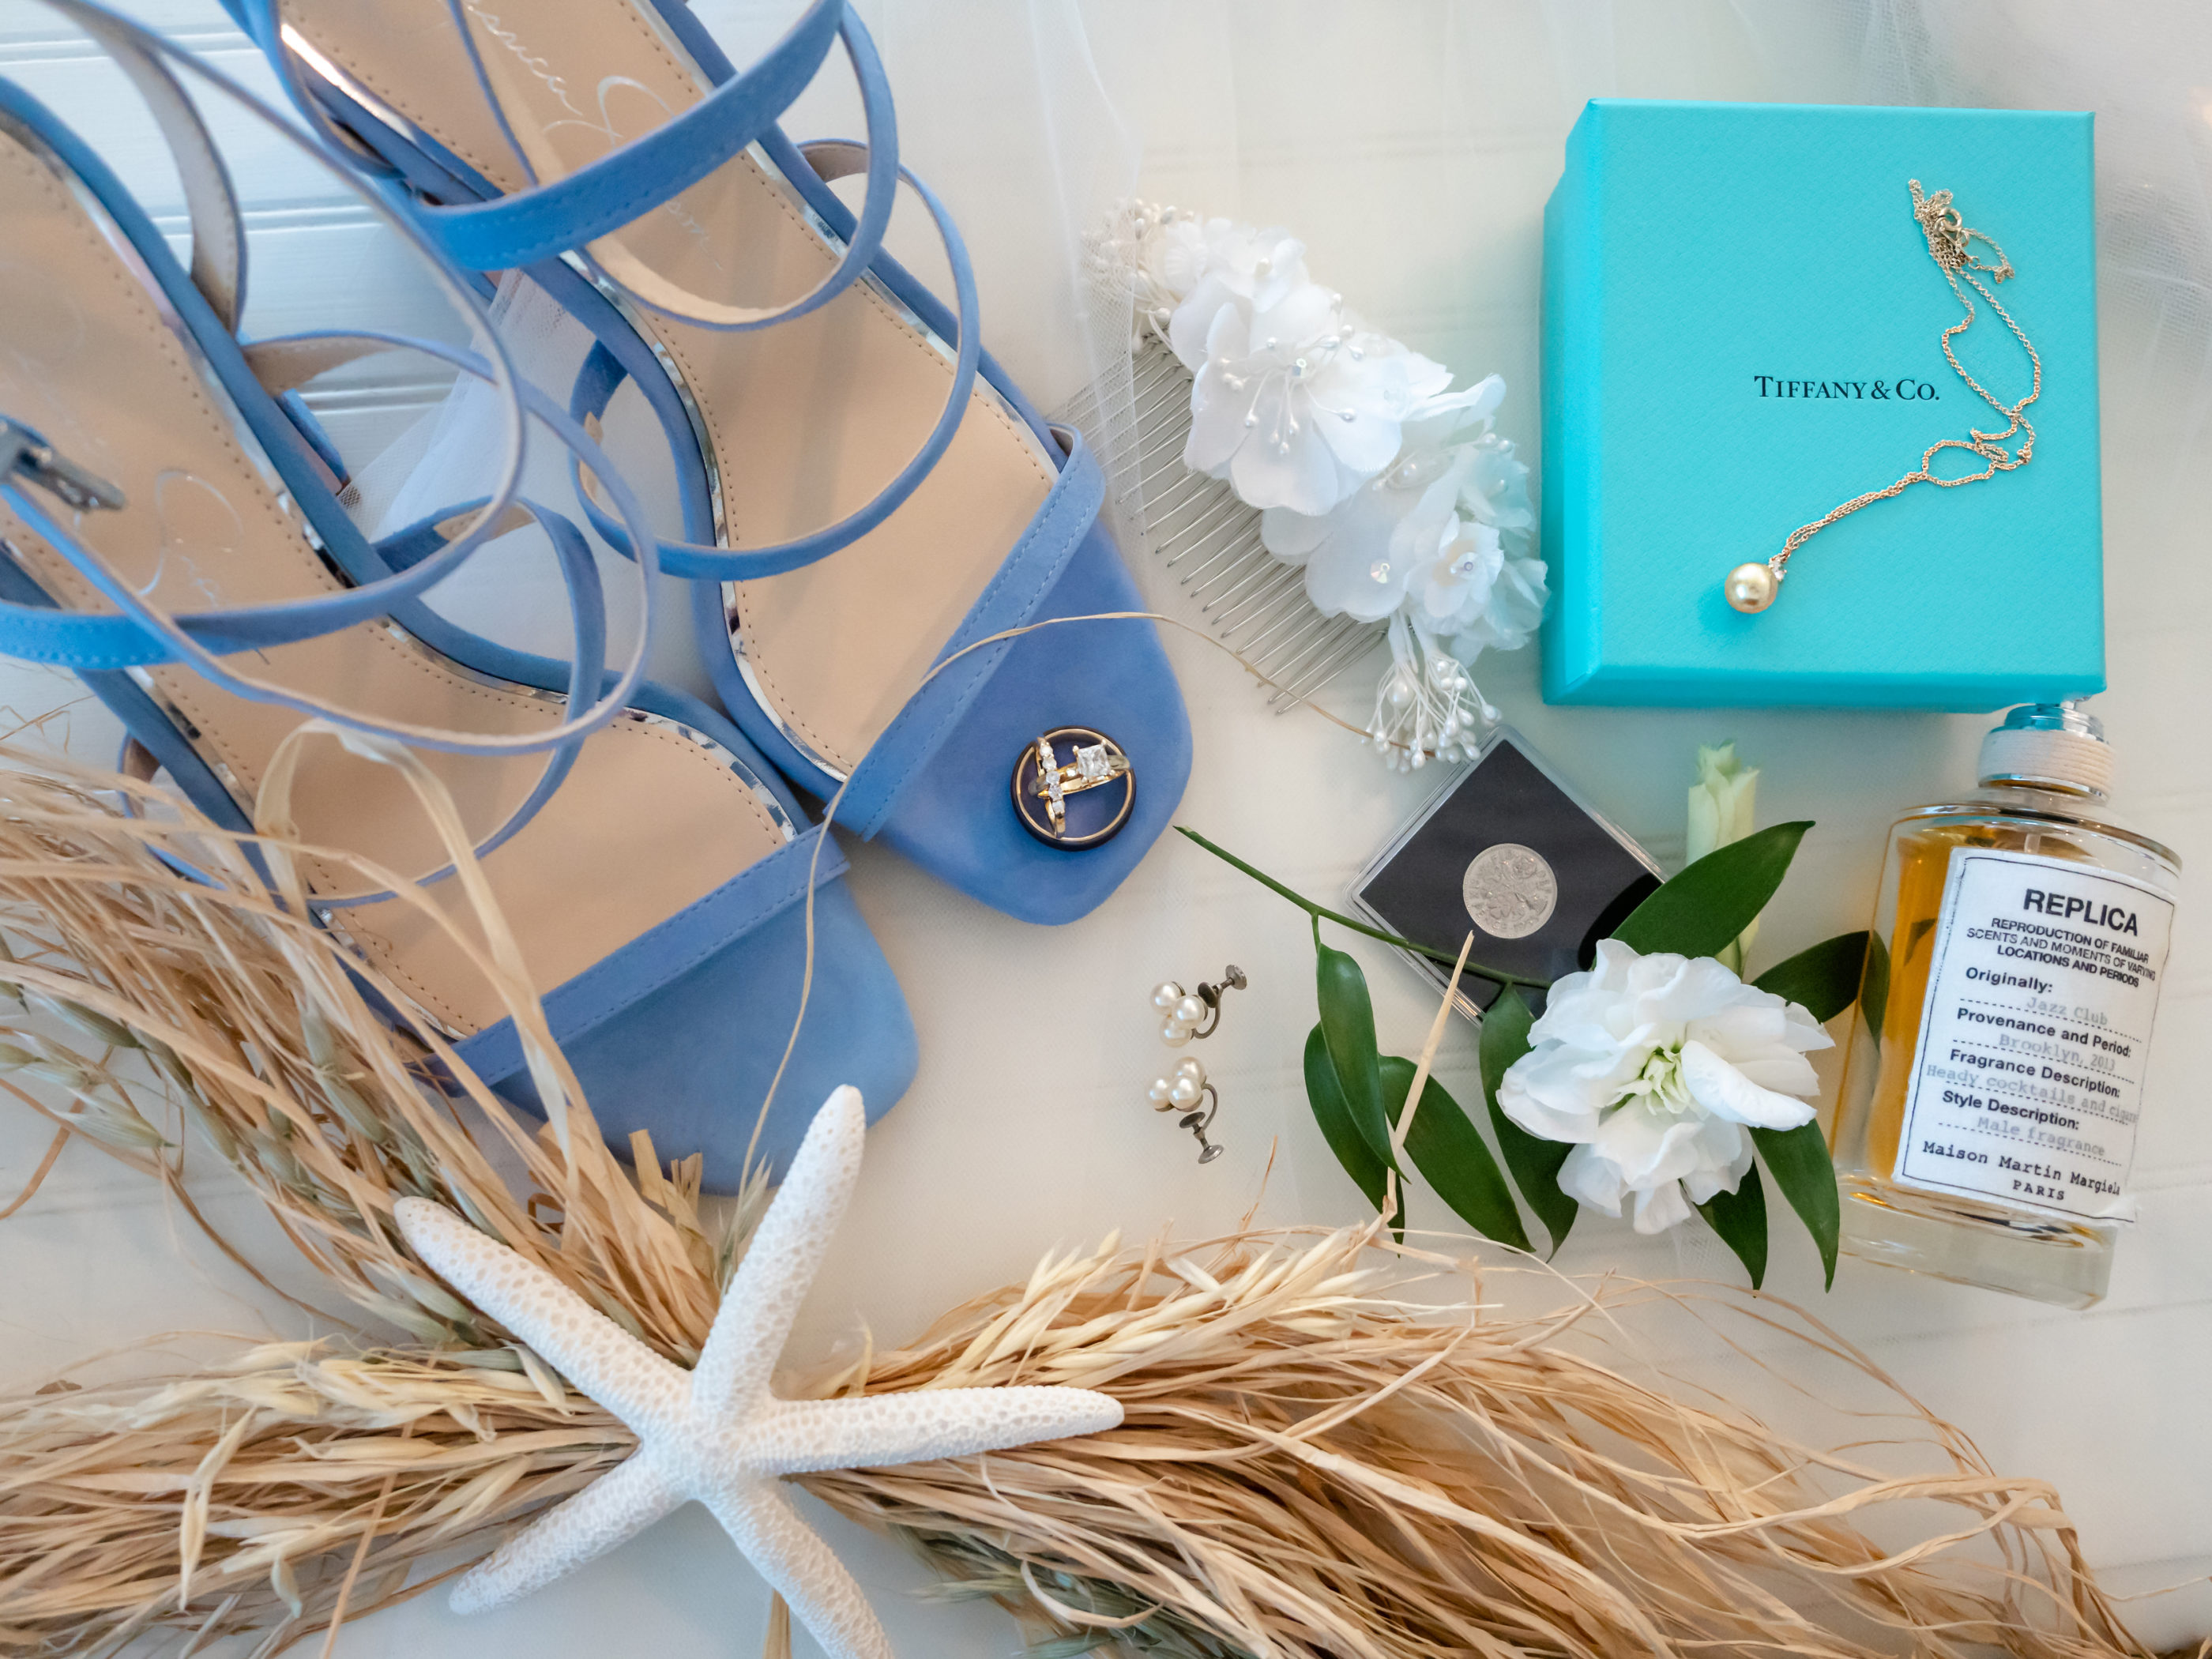 bride's details - blue shoes, rings, tiffany & co. necklace, perfume, sixpence, flowers, rafia, starfish, vintage pearl earrings, vintage white flower hair piece